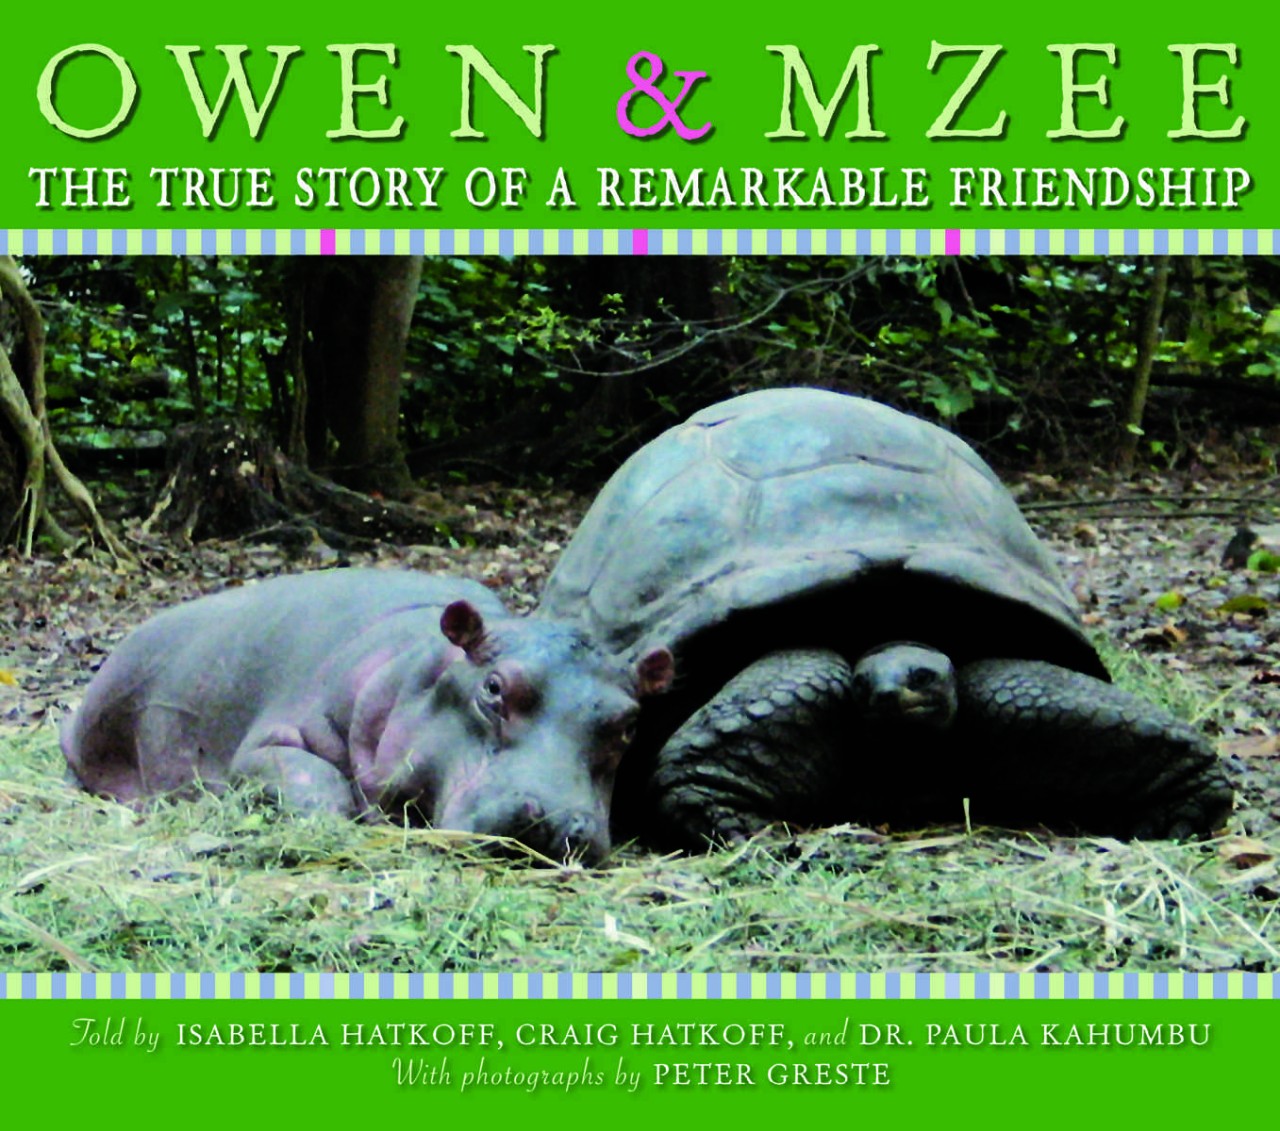 OWEN AND MZEE: THE TRUE STORY OF